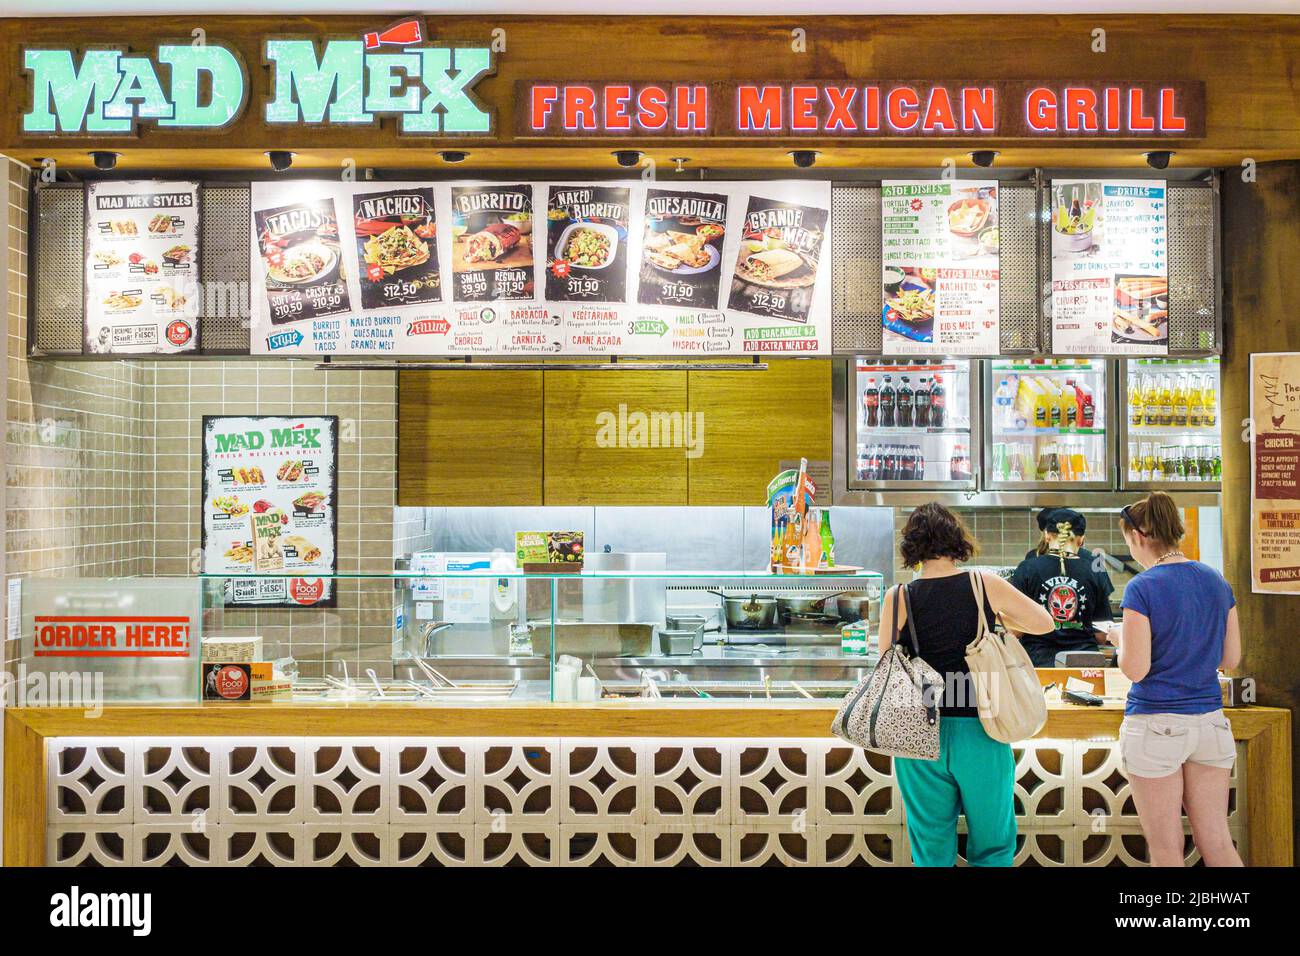 Sydney Australia,Kingsford-Smith Airport,SYD,terminal,Mad Mex Fresh Mexican Grill,fast food,counter,restaurant female women customers Stock Photo